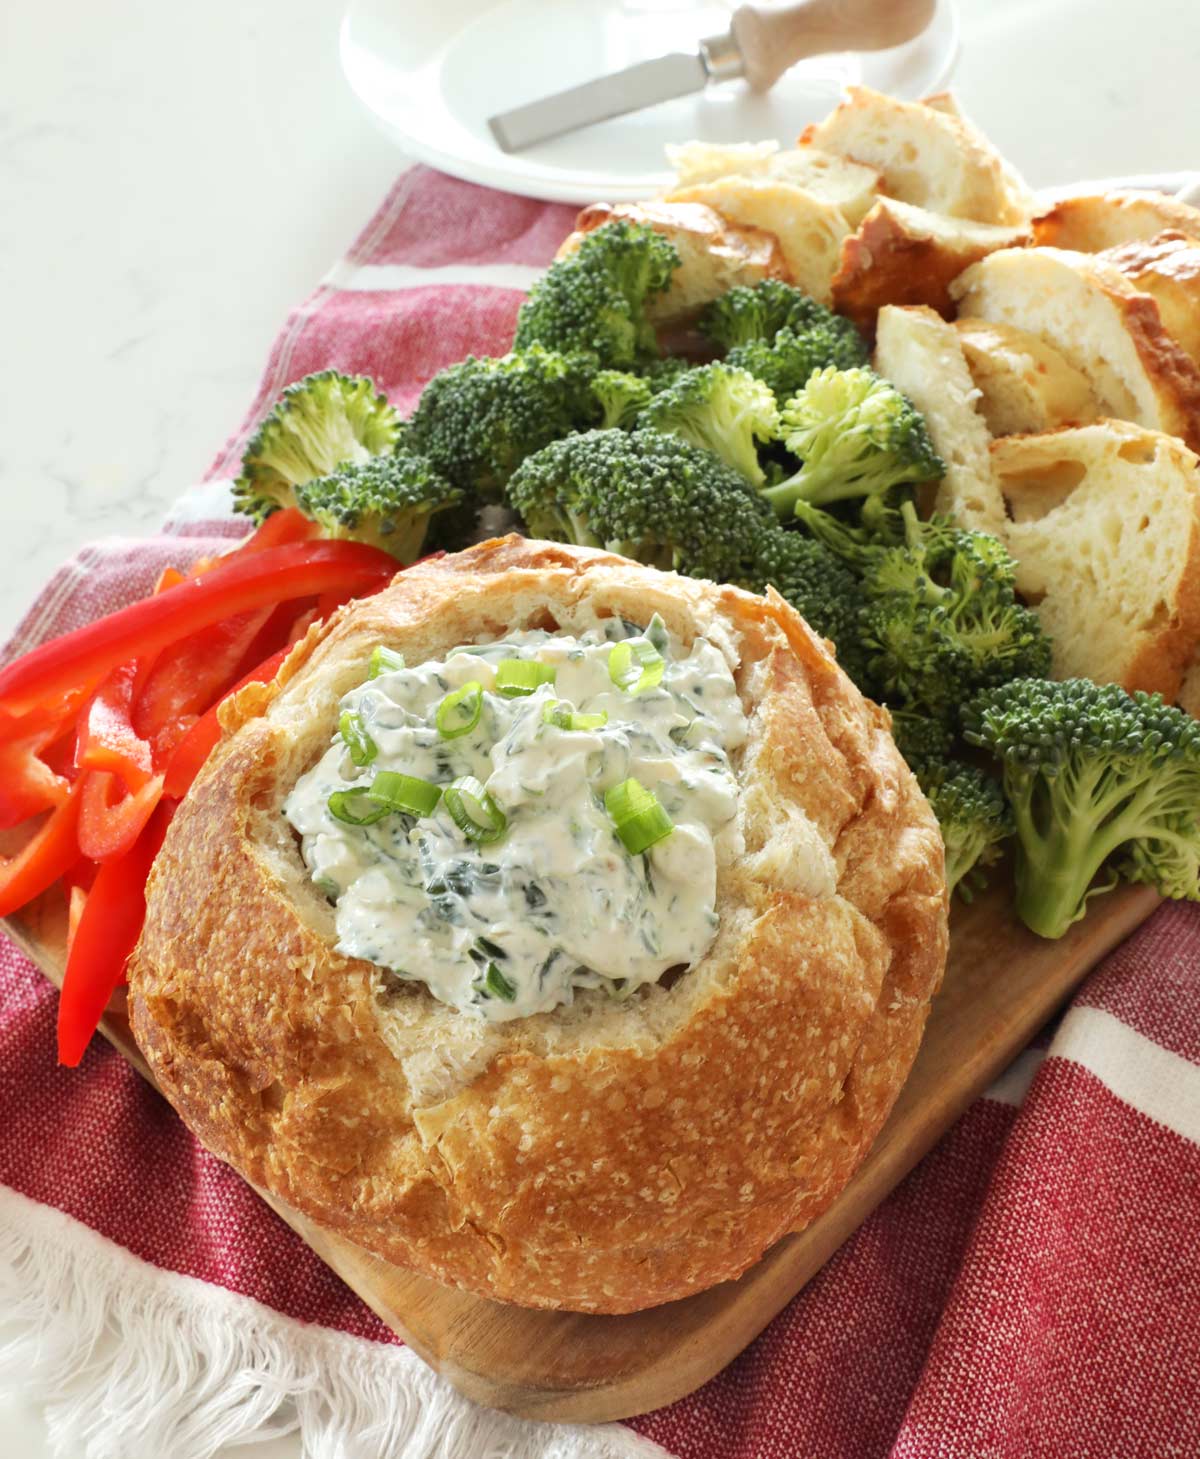 A close up of a bread bowl full of Knorr spinach dip sits on a wooden board along with some broccoli florets, sliced red bell pepper and more bread pieces, a cheese spreader sits on a white plate in the background on top of the kitchen counter.